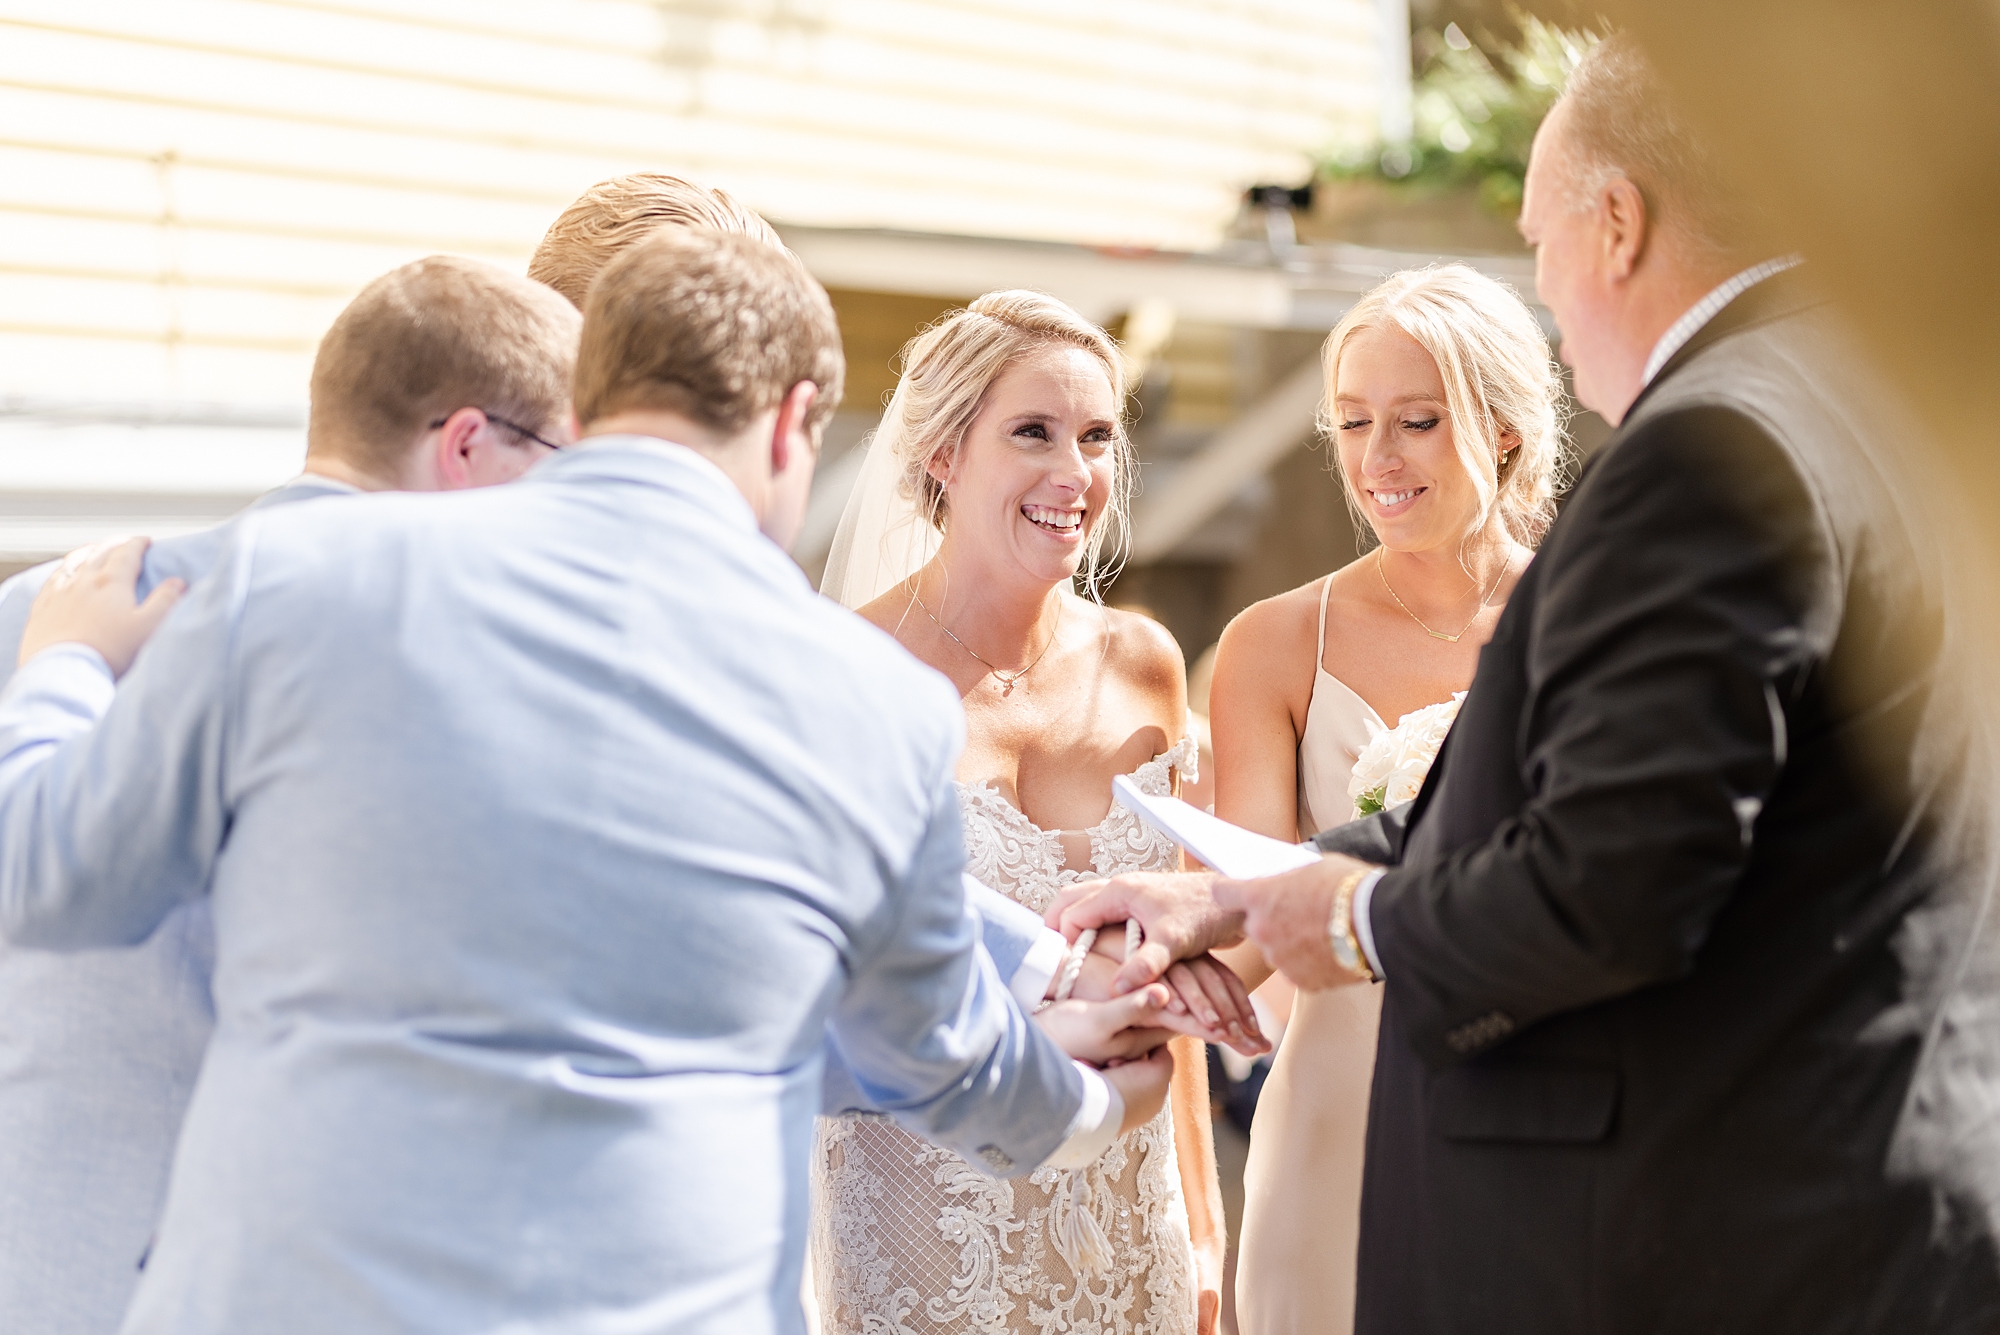 family gives bride away during wedding ceremony